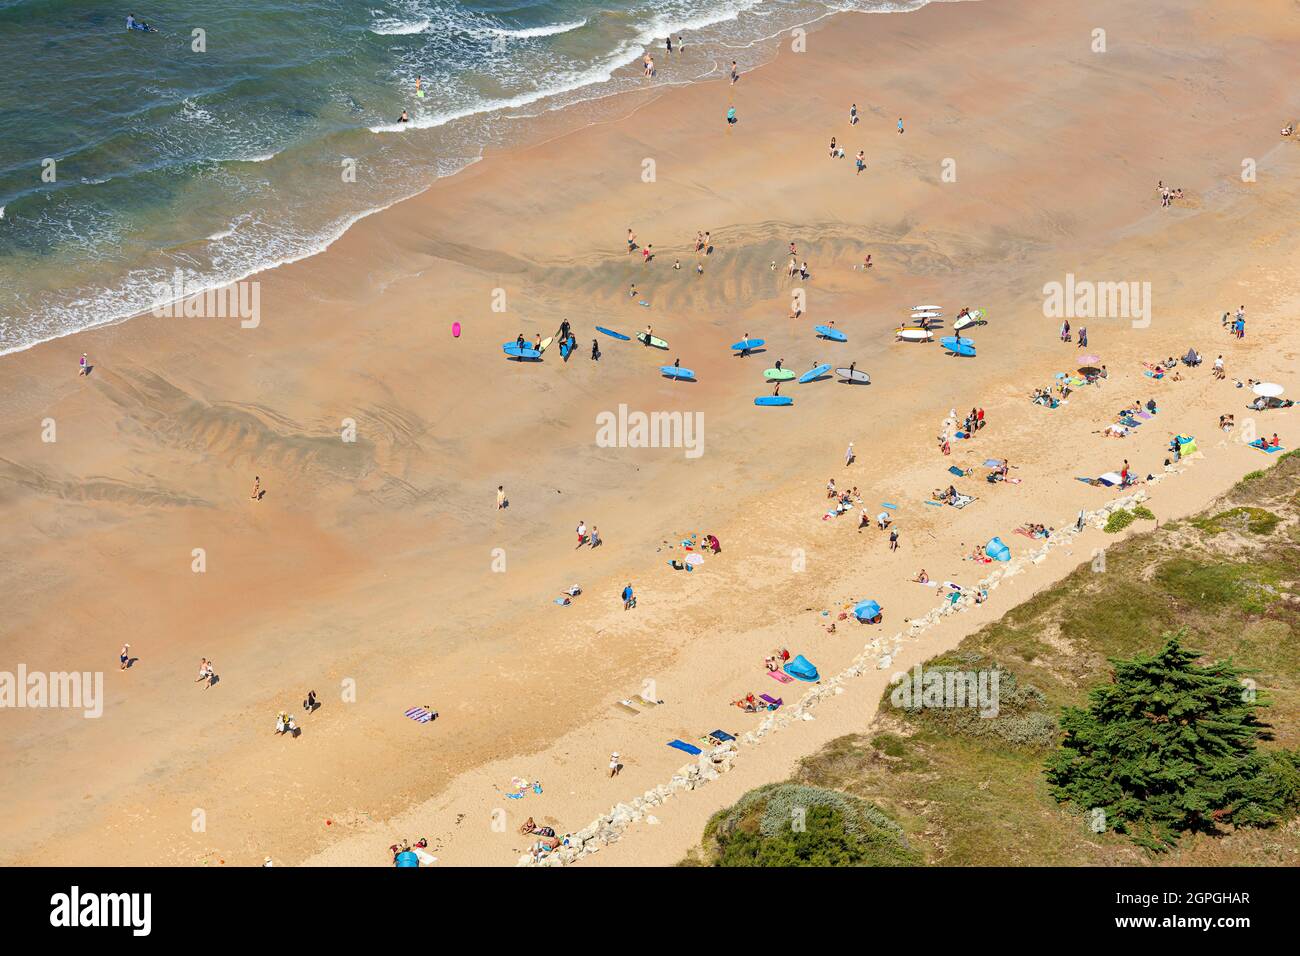 France, Charente Maritime, Dolus d'Oleron, La Perroche bay in summer (aerial view) Stock Photo